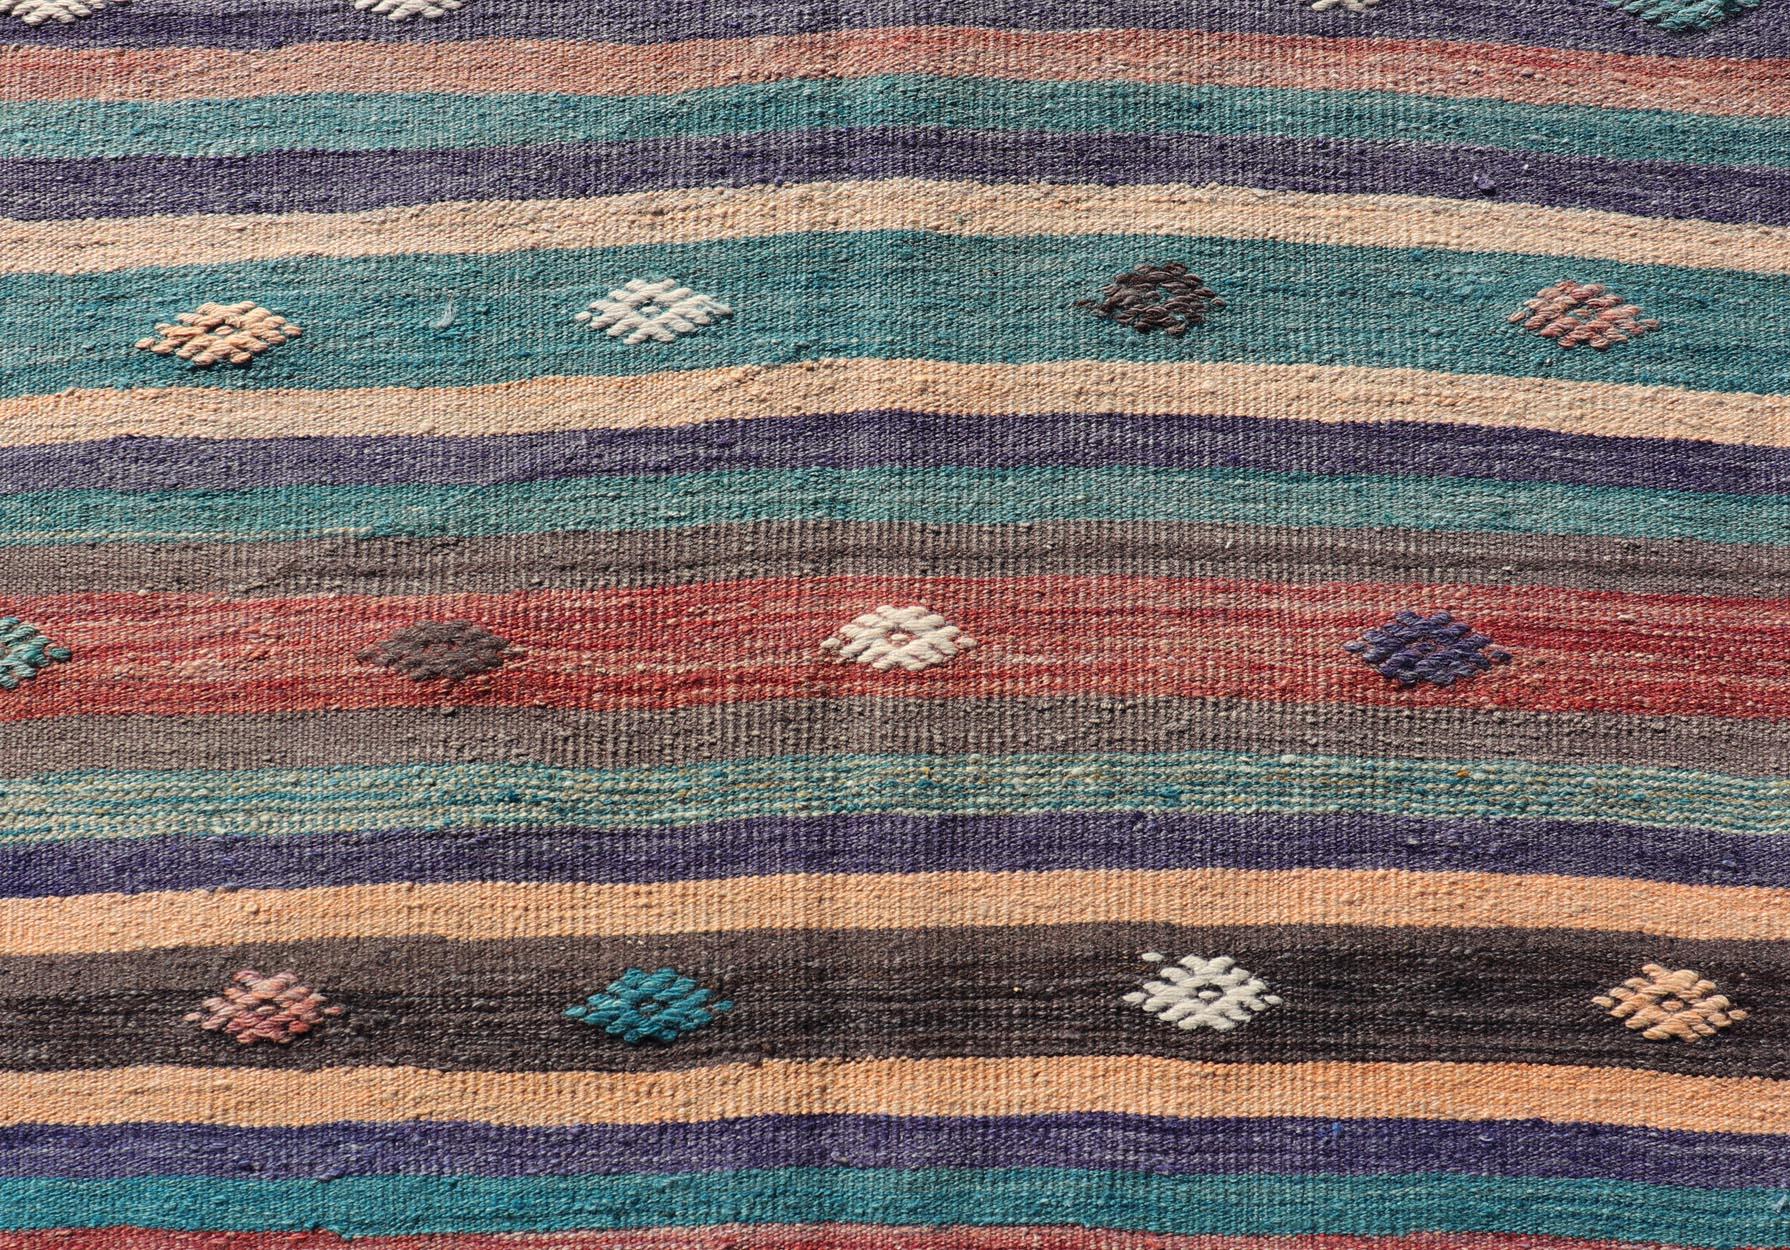 Measures: 3'3 x 10'10 
Colorful Vintage Embroidered Kilim Runner with Stripe's and Geometric. Keivan Woven Arts / rug TU-NED-5004, country of origin / type: Turkey / Kilim, circa 1950

This vintage Kilim displays an array of designs, including a